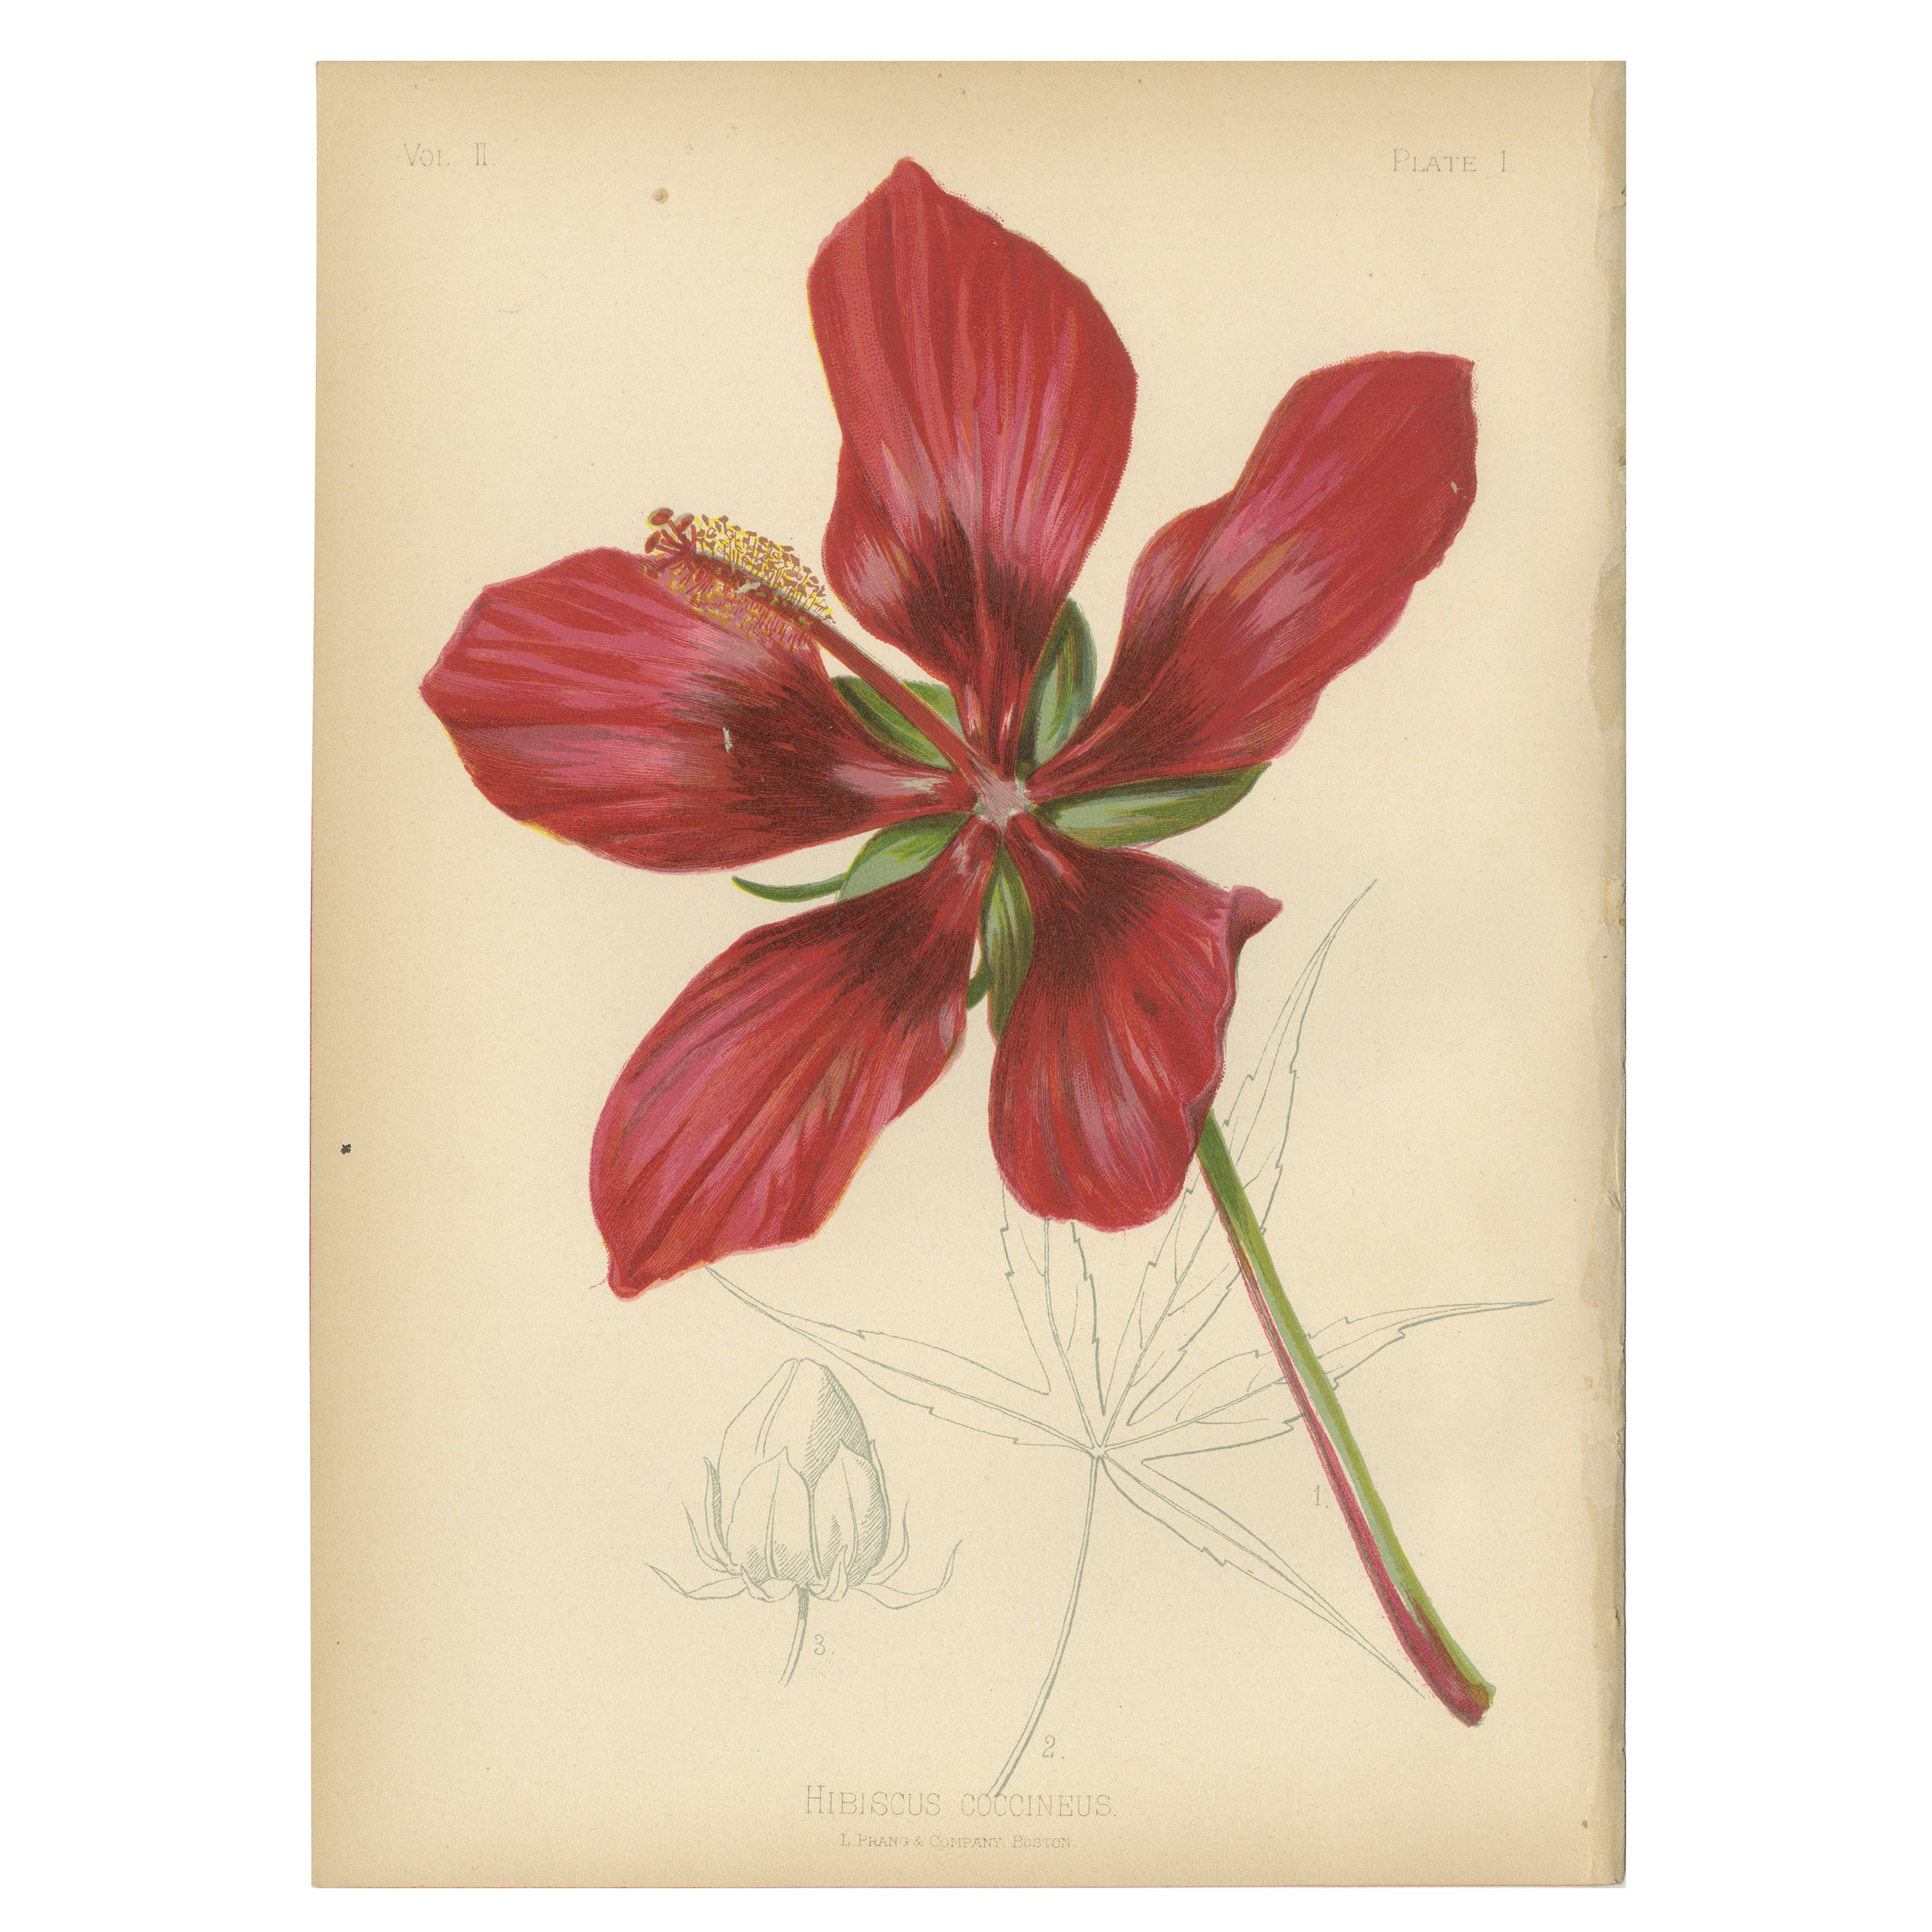 Scarlet Rosemallow aus The Native Flowers and Ferns of the United States, 1879